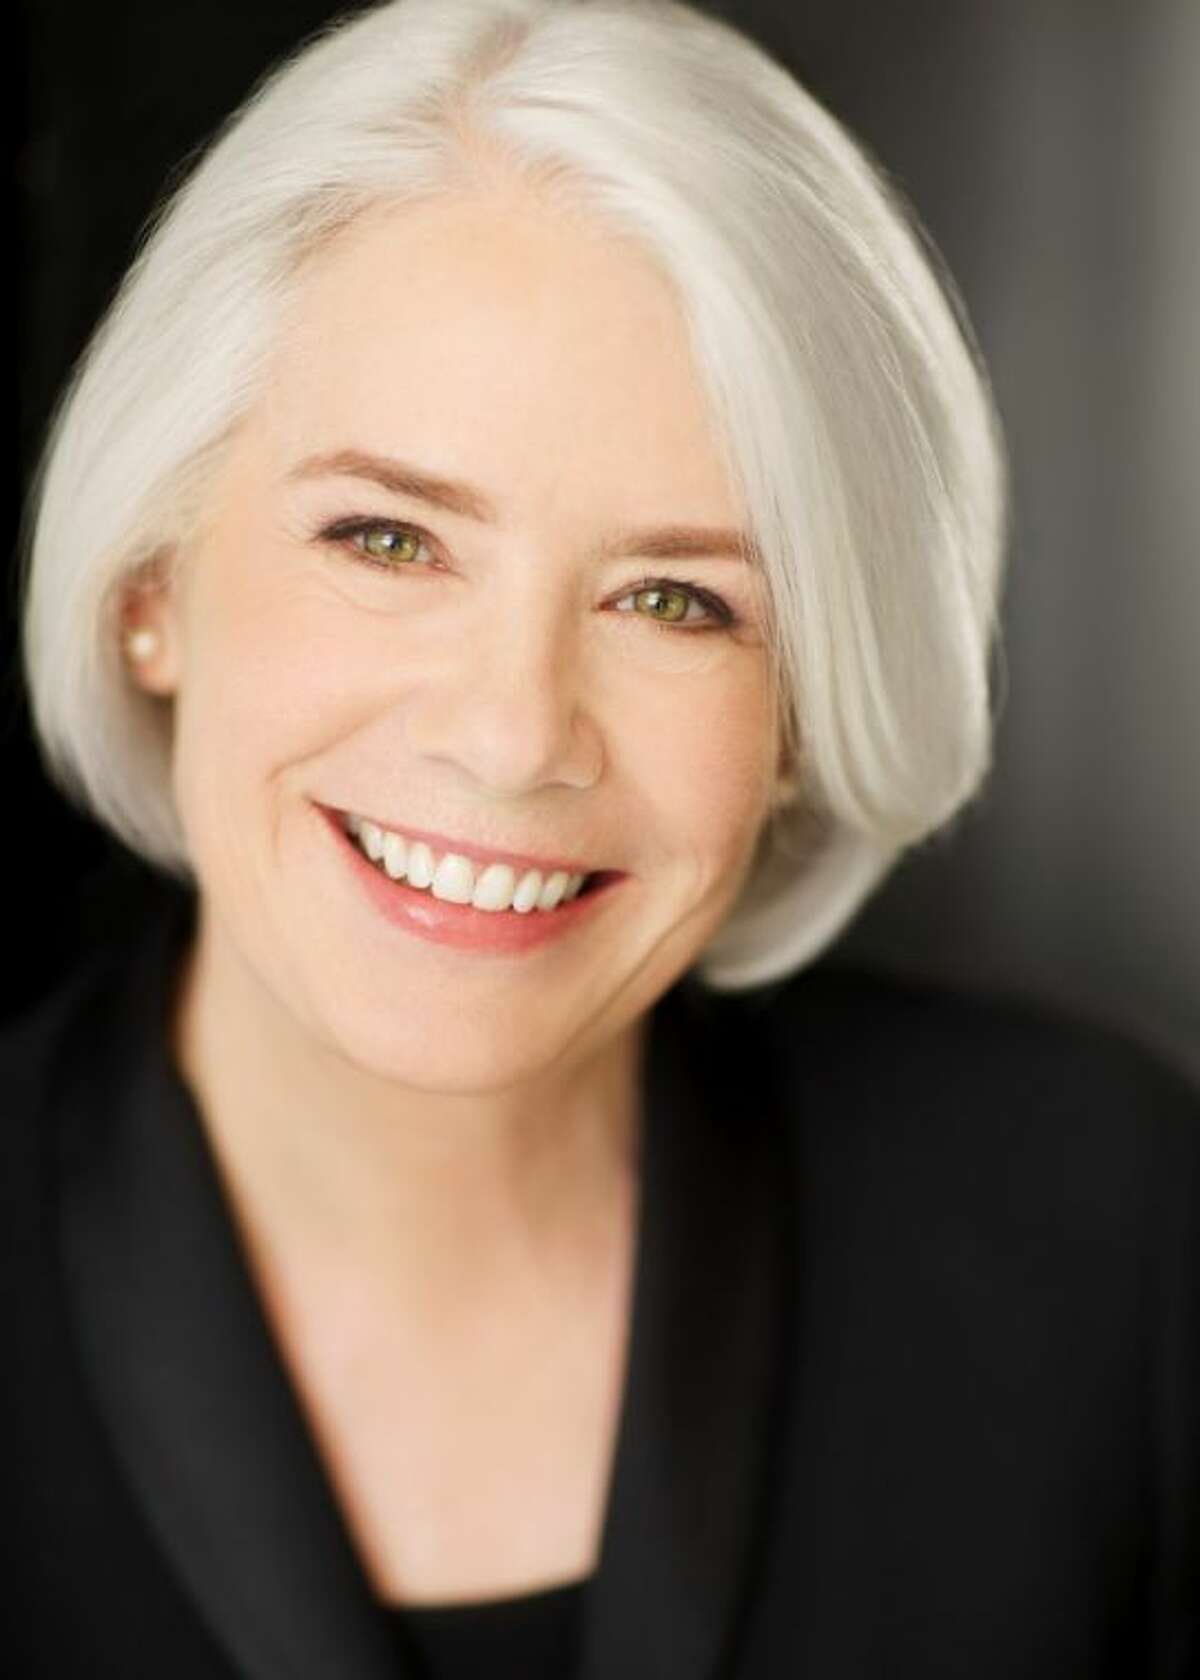 The Houston Symphony has announced Dr. Betsy Cook Weber as Hausmann’s successor. Weber has been an associate director of the Houston Symphony Chorus in the past and looks forward to the new opportunity. She begins Sept. 1.